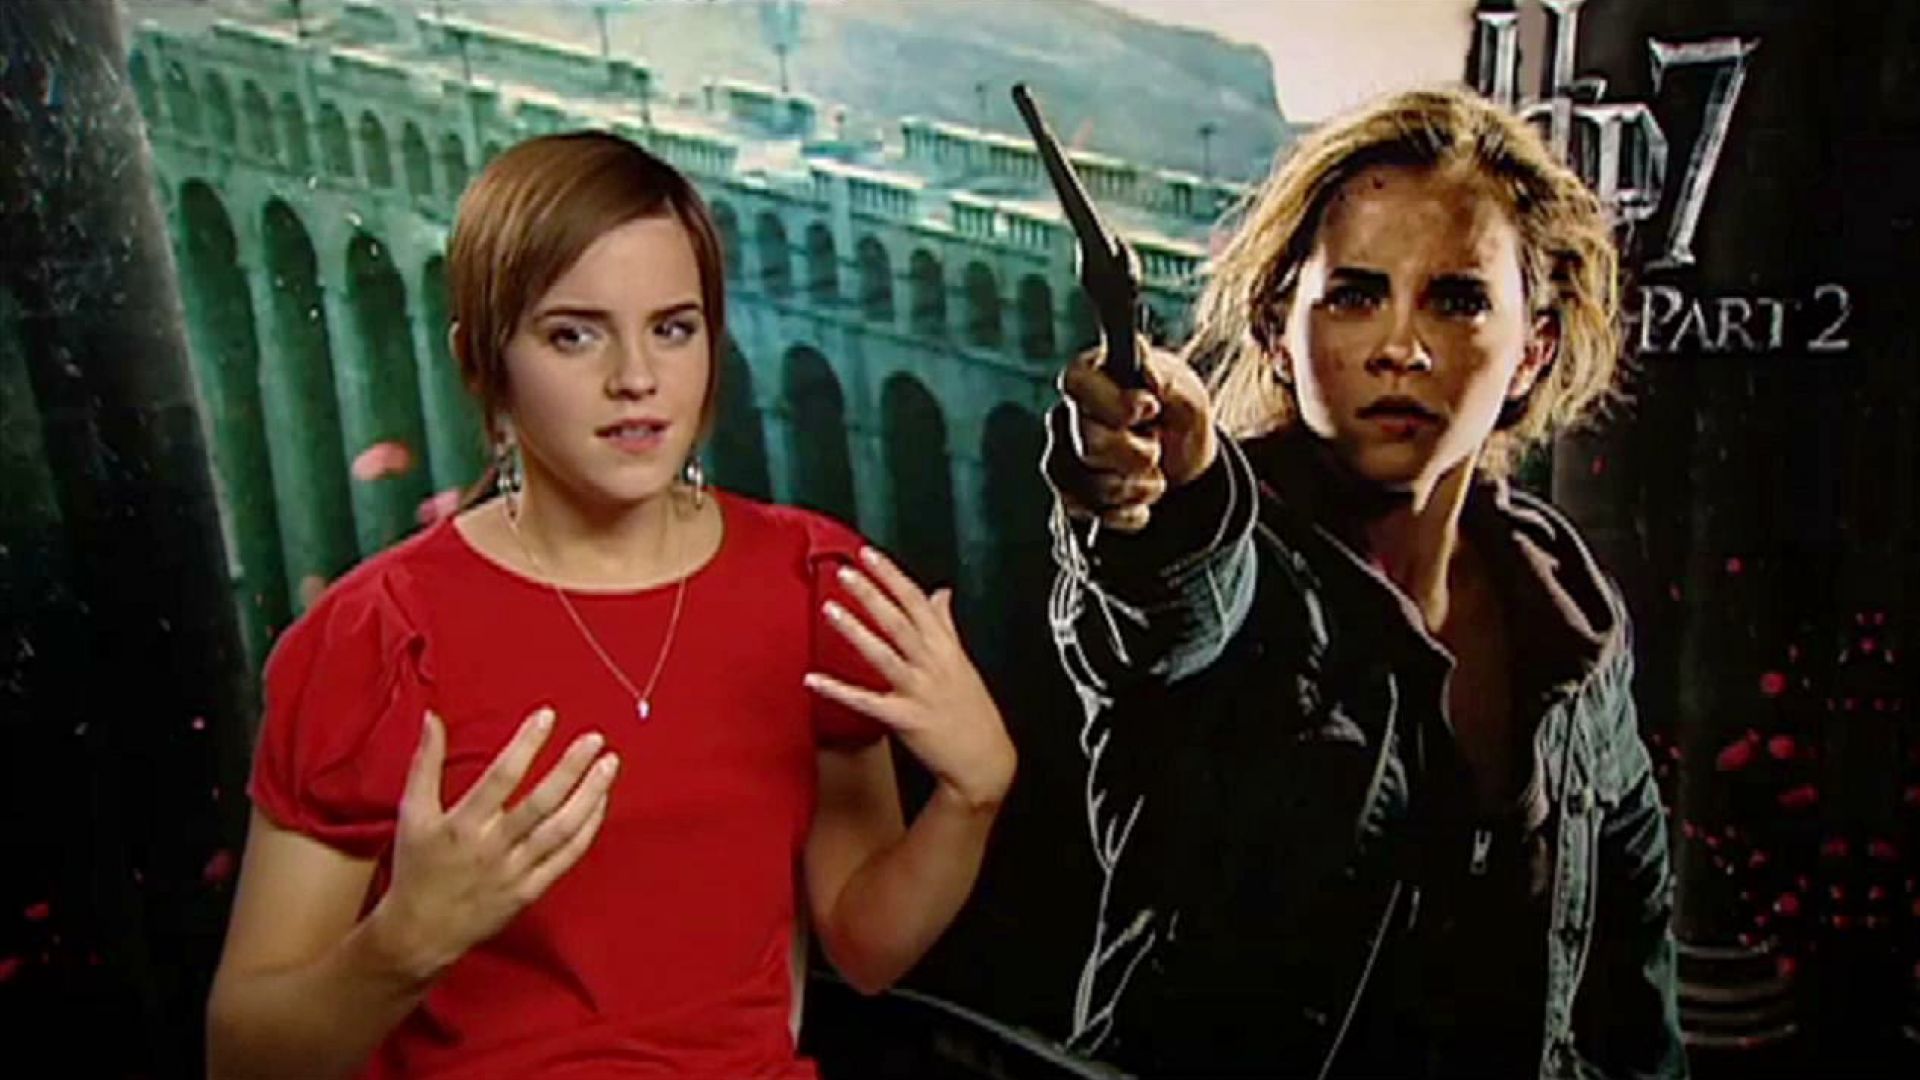 Emma Watson talks about playing Hermione Granger in Harry Potter 7 Part 2